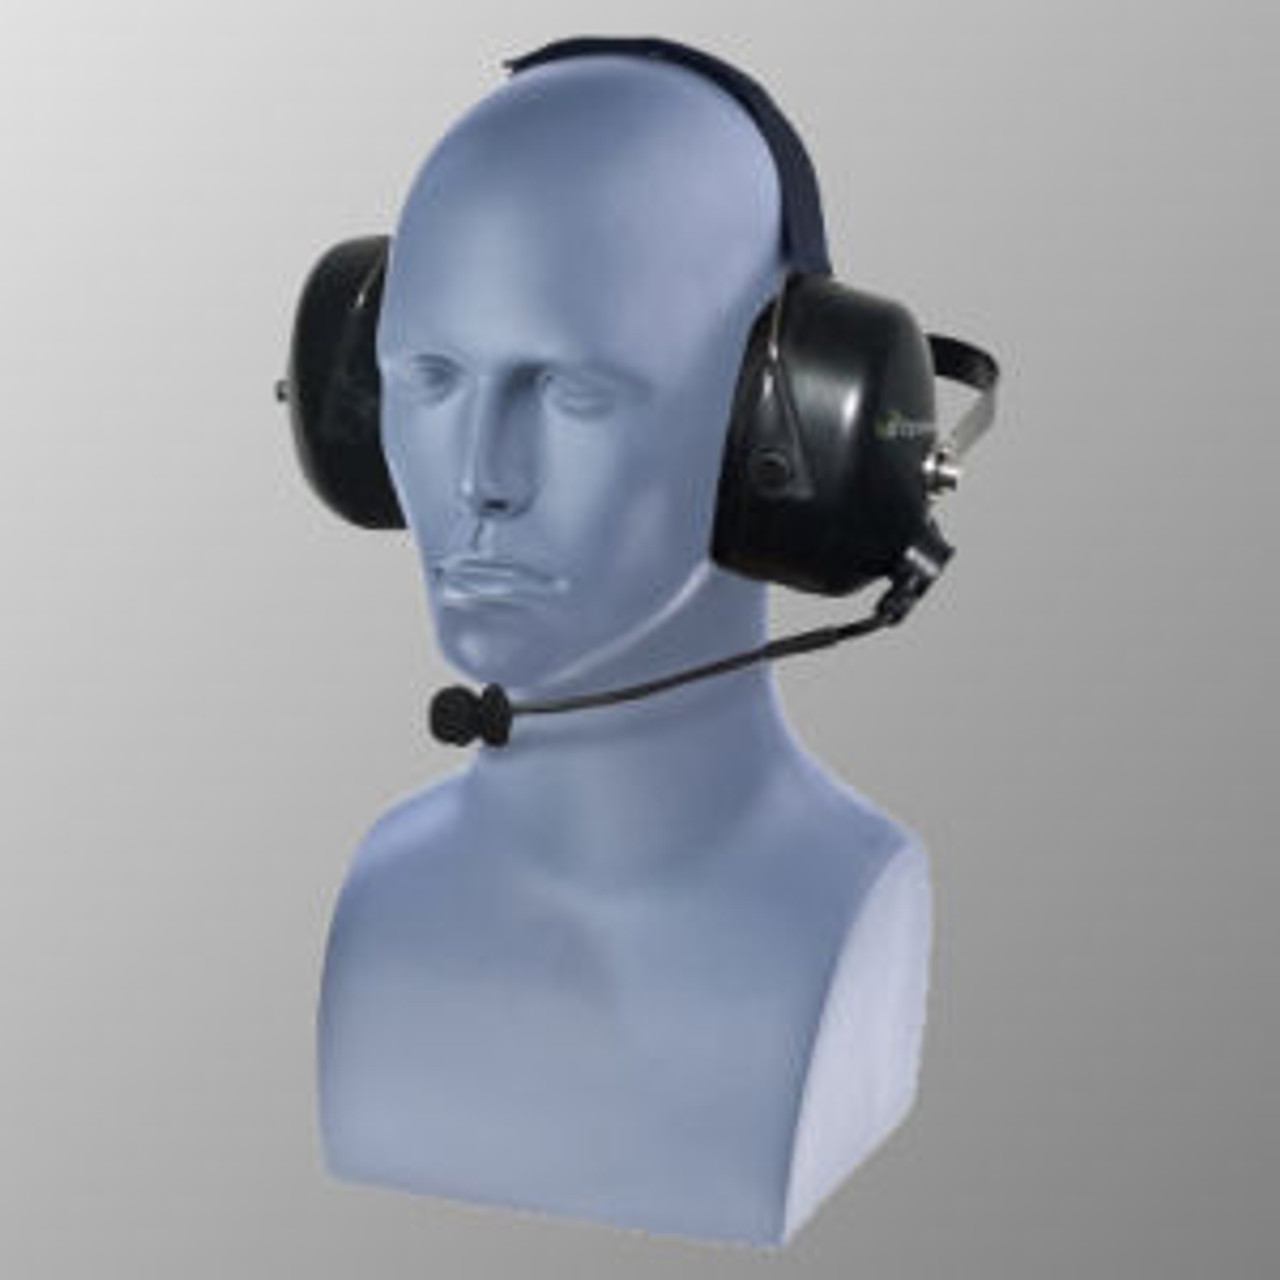 Harris P5100 Noise Canceling Double Muff Behind The Head Headset